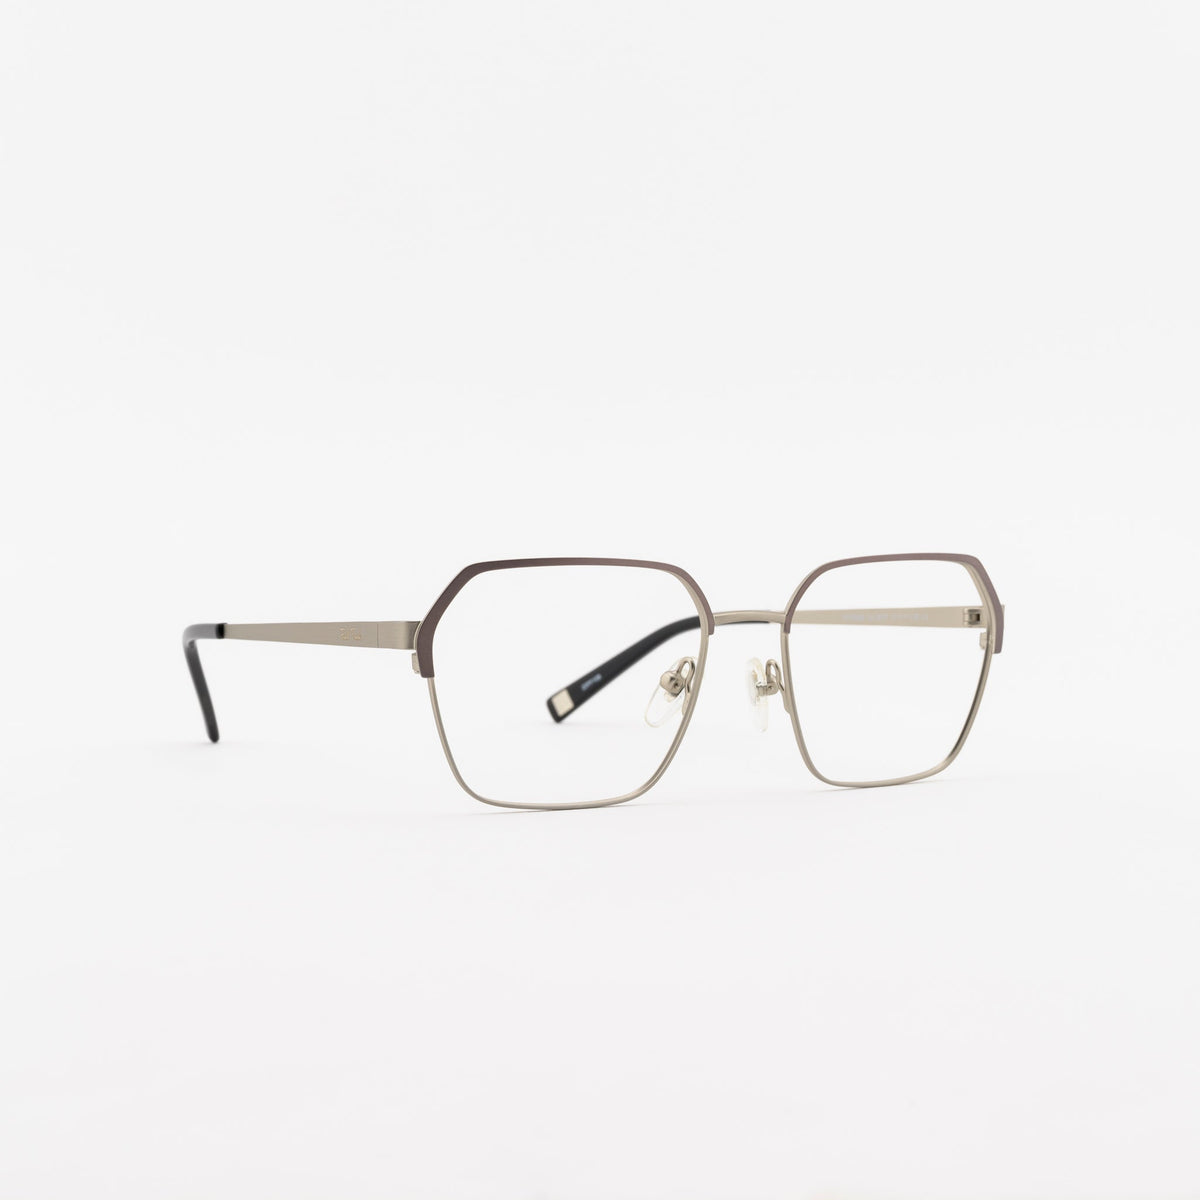 PFF8058 Frames Paul Frank 53 8070 - GREY/SILVER Not Available